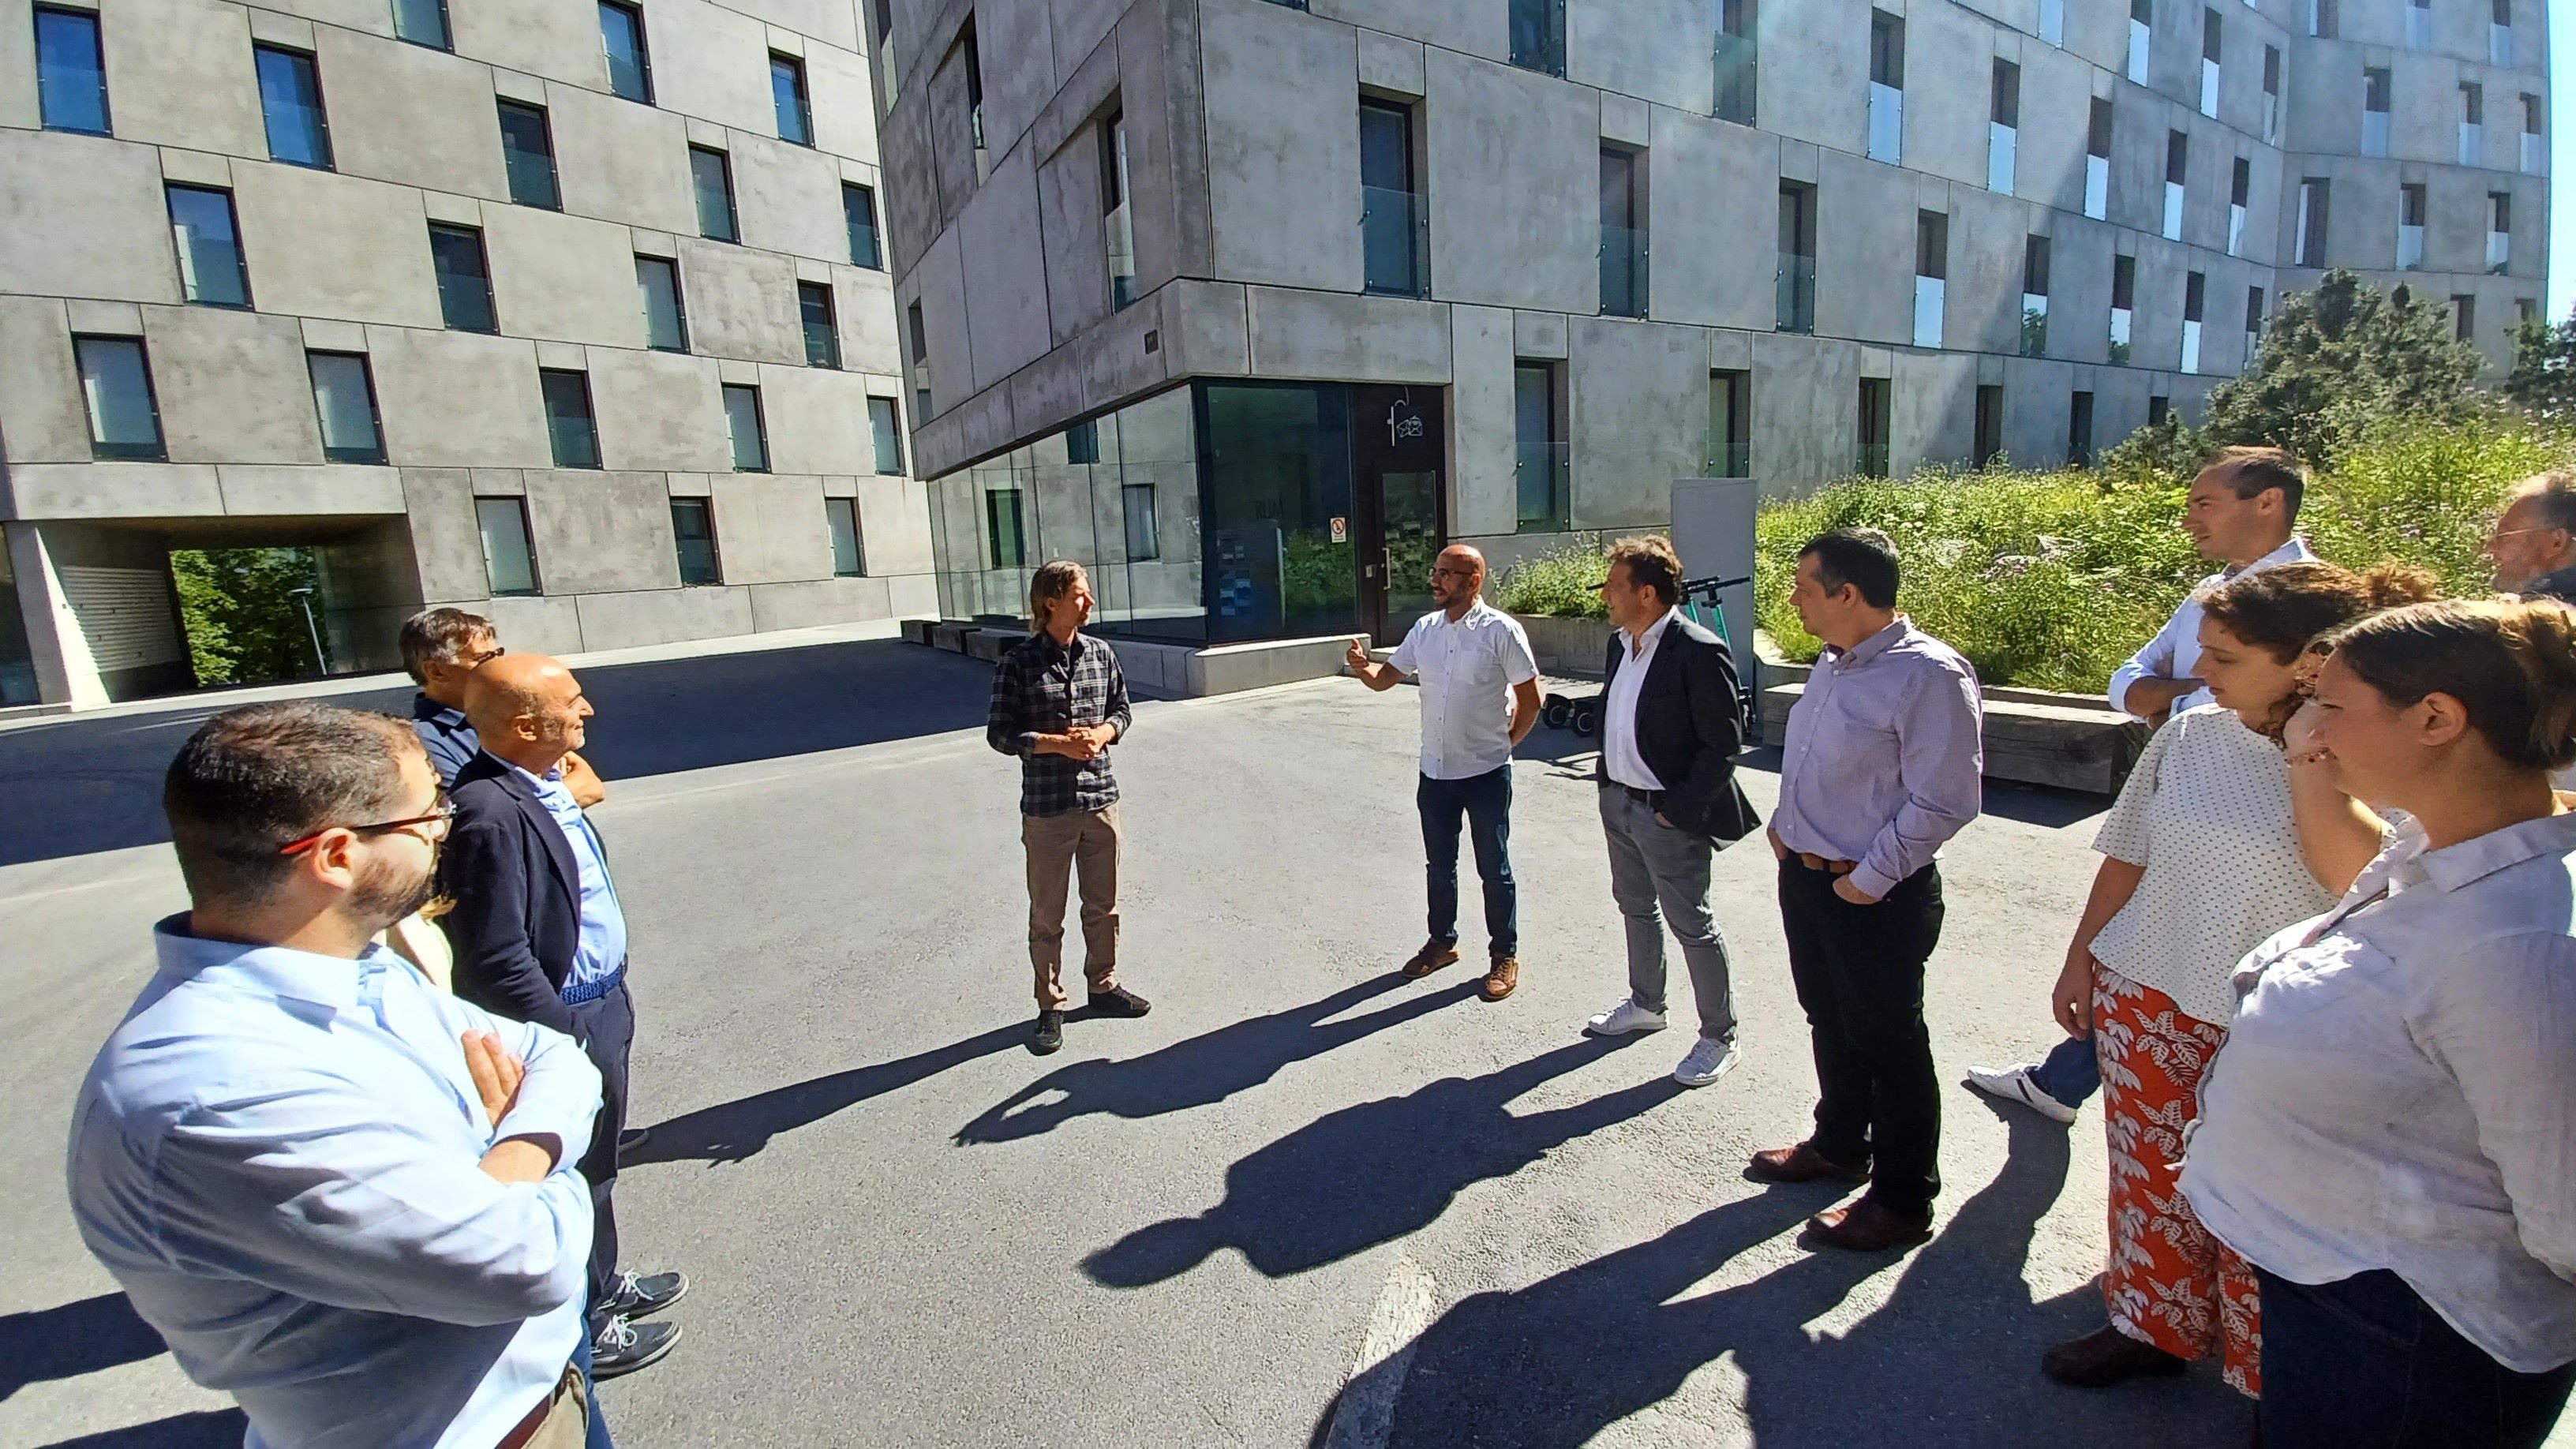 A group of researchers talking in front of modern buildings